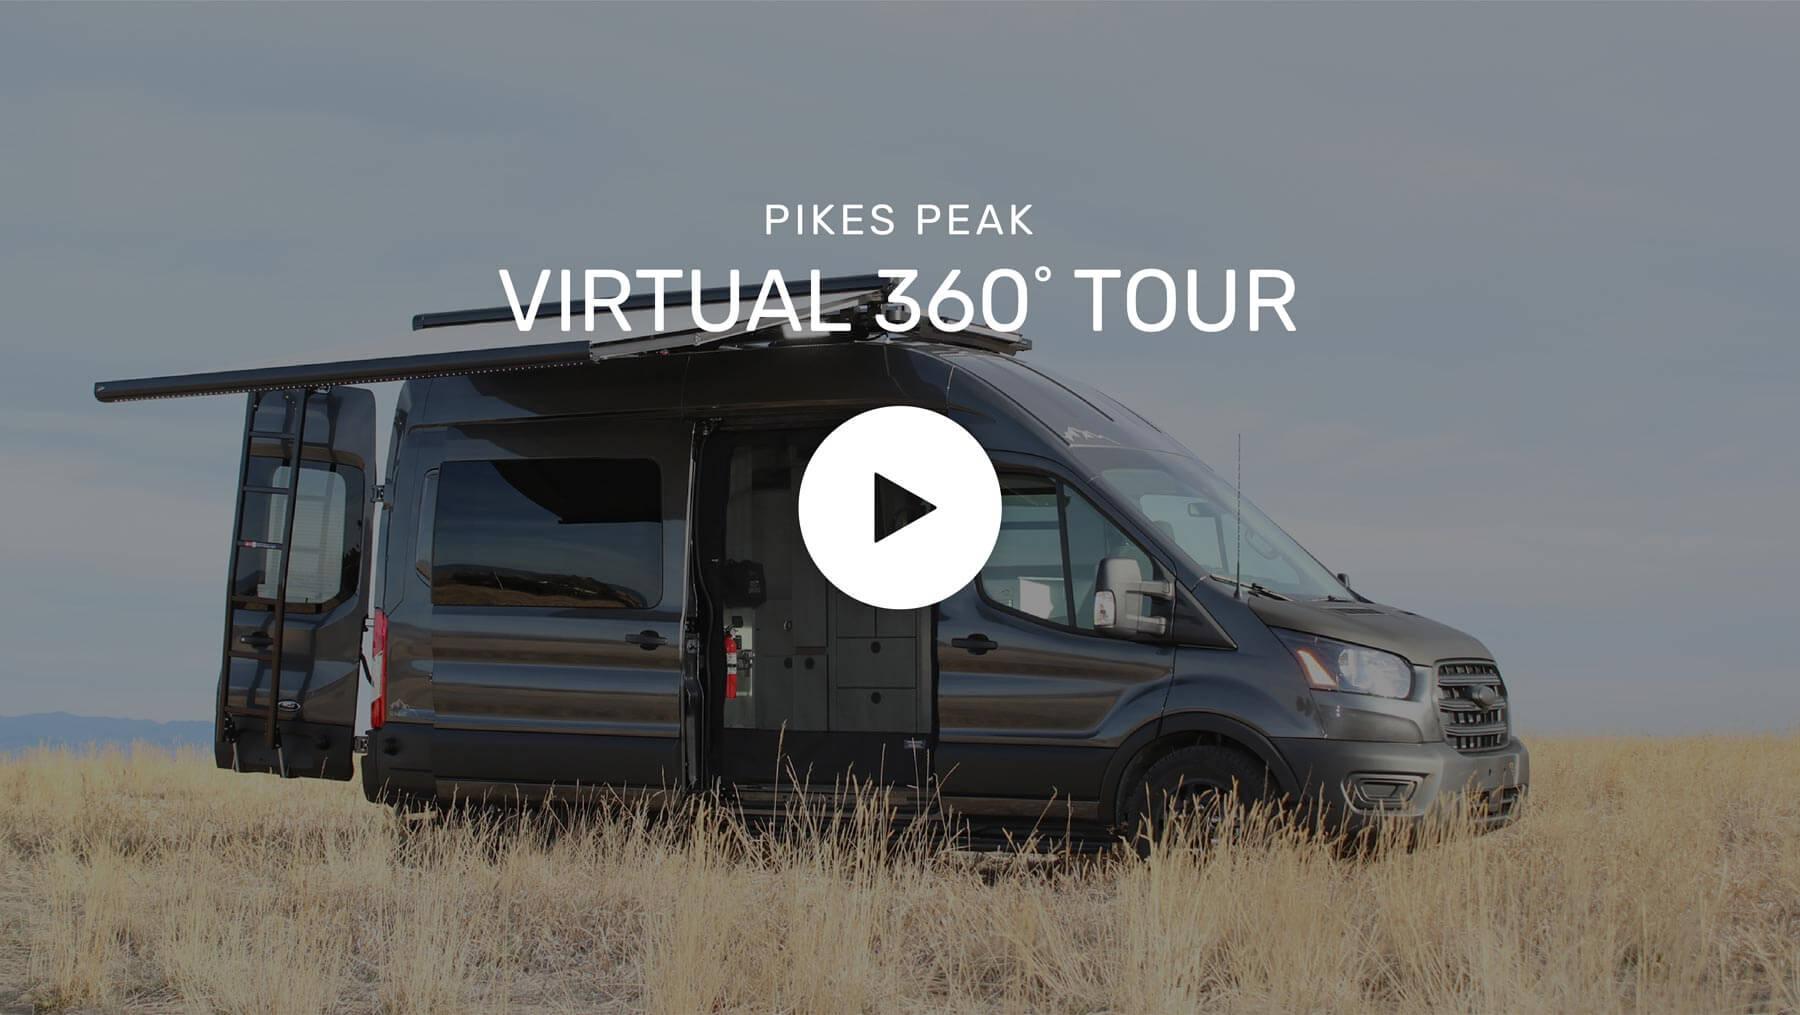 A preview image for the matterport Pikes Peak virtual tour